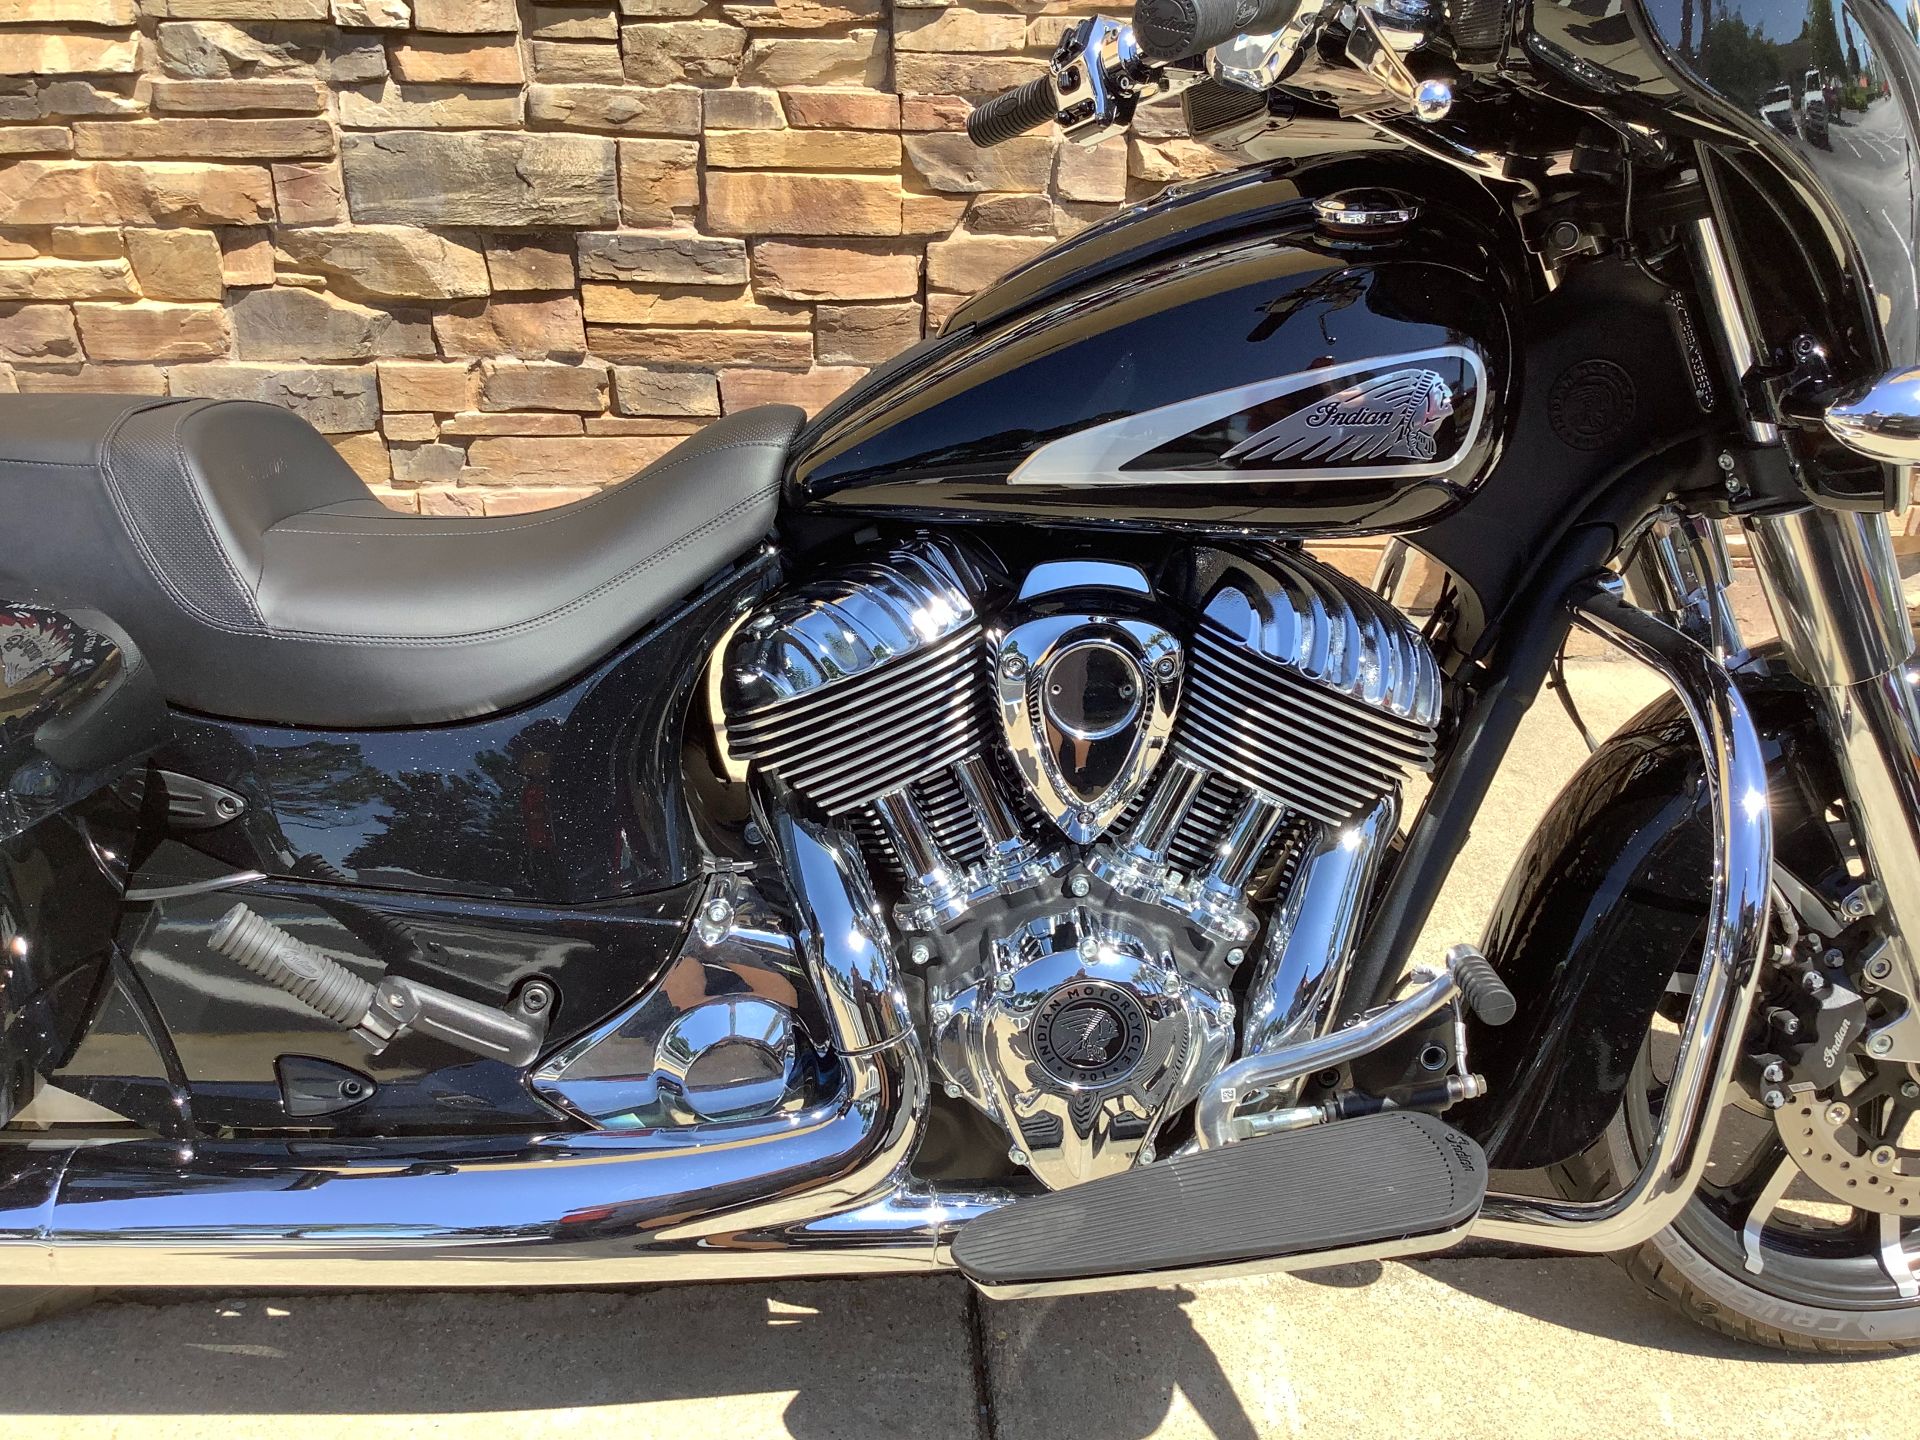 2021 Indian CHIEFTAIN LIMITED in Panama City Beach, Florida - Photo 4